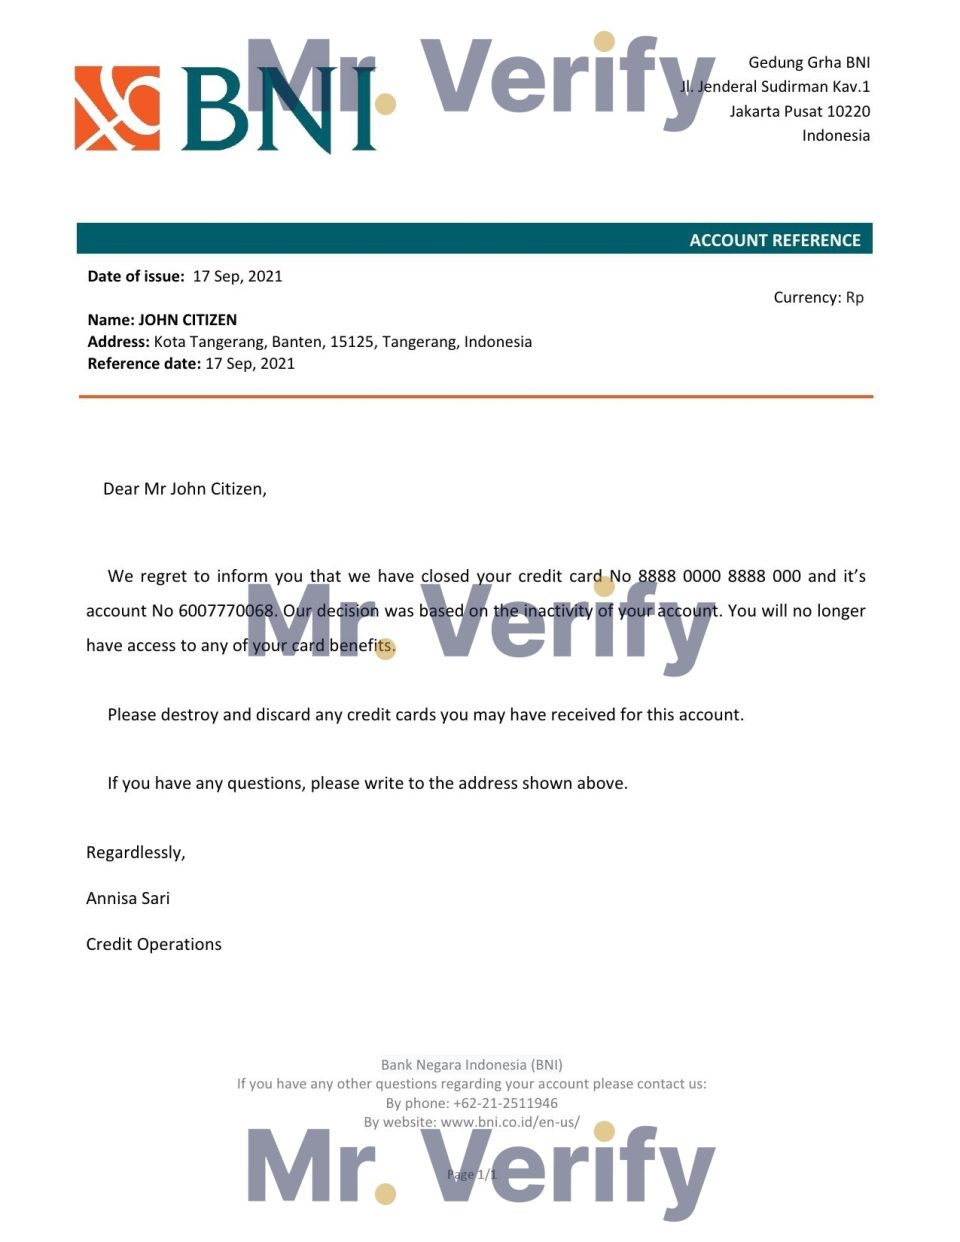 Download Indonesia Negara Bank Reference Letter Templates | Editable Word